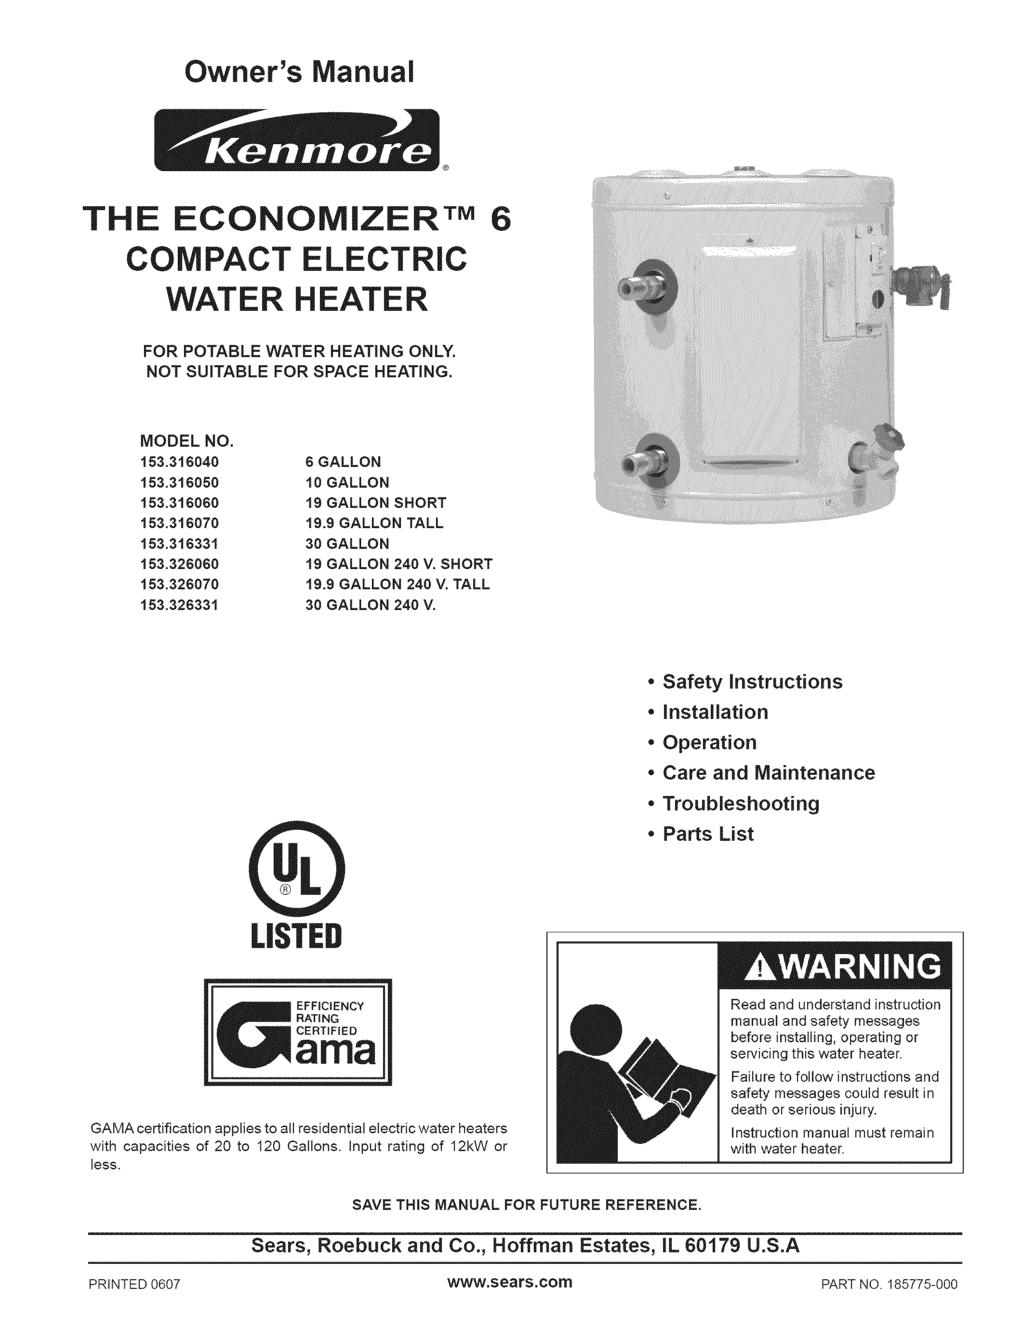 Owner's ManuaJ THE ECONOMIZERrM COMPACT ELECTRIC WATER HEATER 6 FOR POTABLE WATER HEATING ONLY. NOT SUITABLE FOR SPACE HEATING. MODEL NO. 153.316040 153.316050 153.316060 153.316070 153.316331 153.